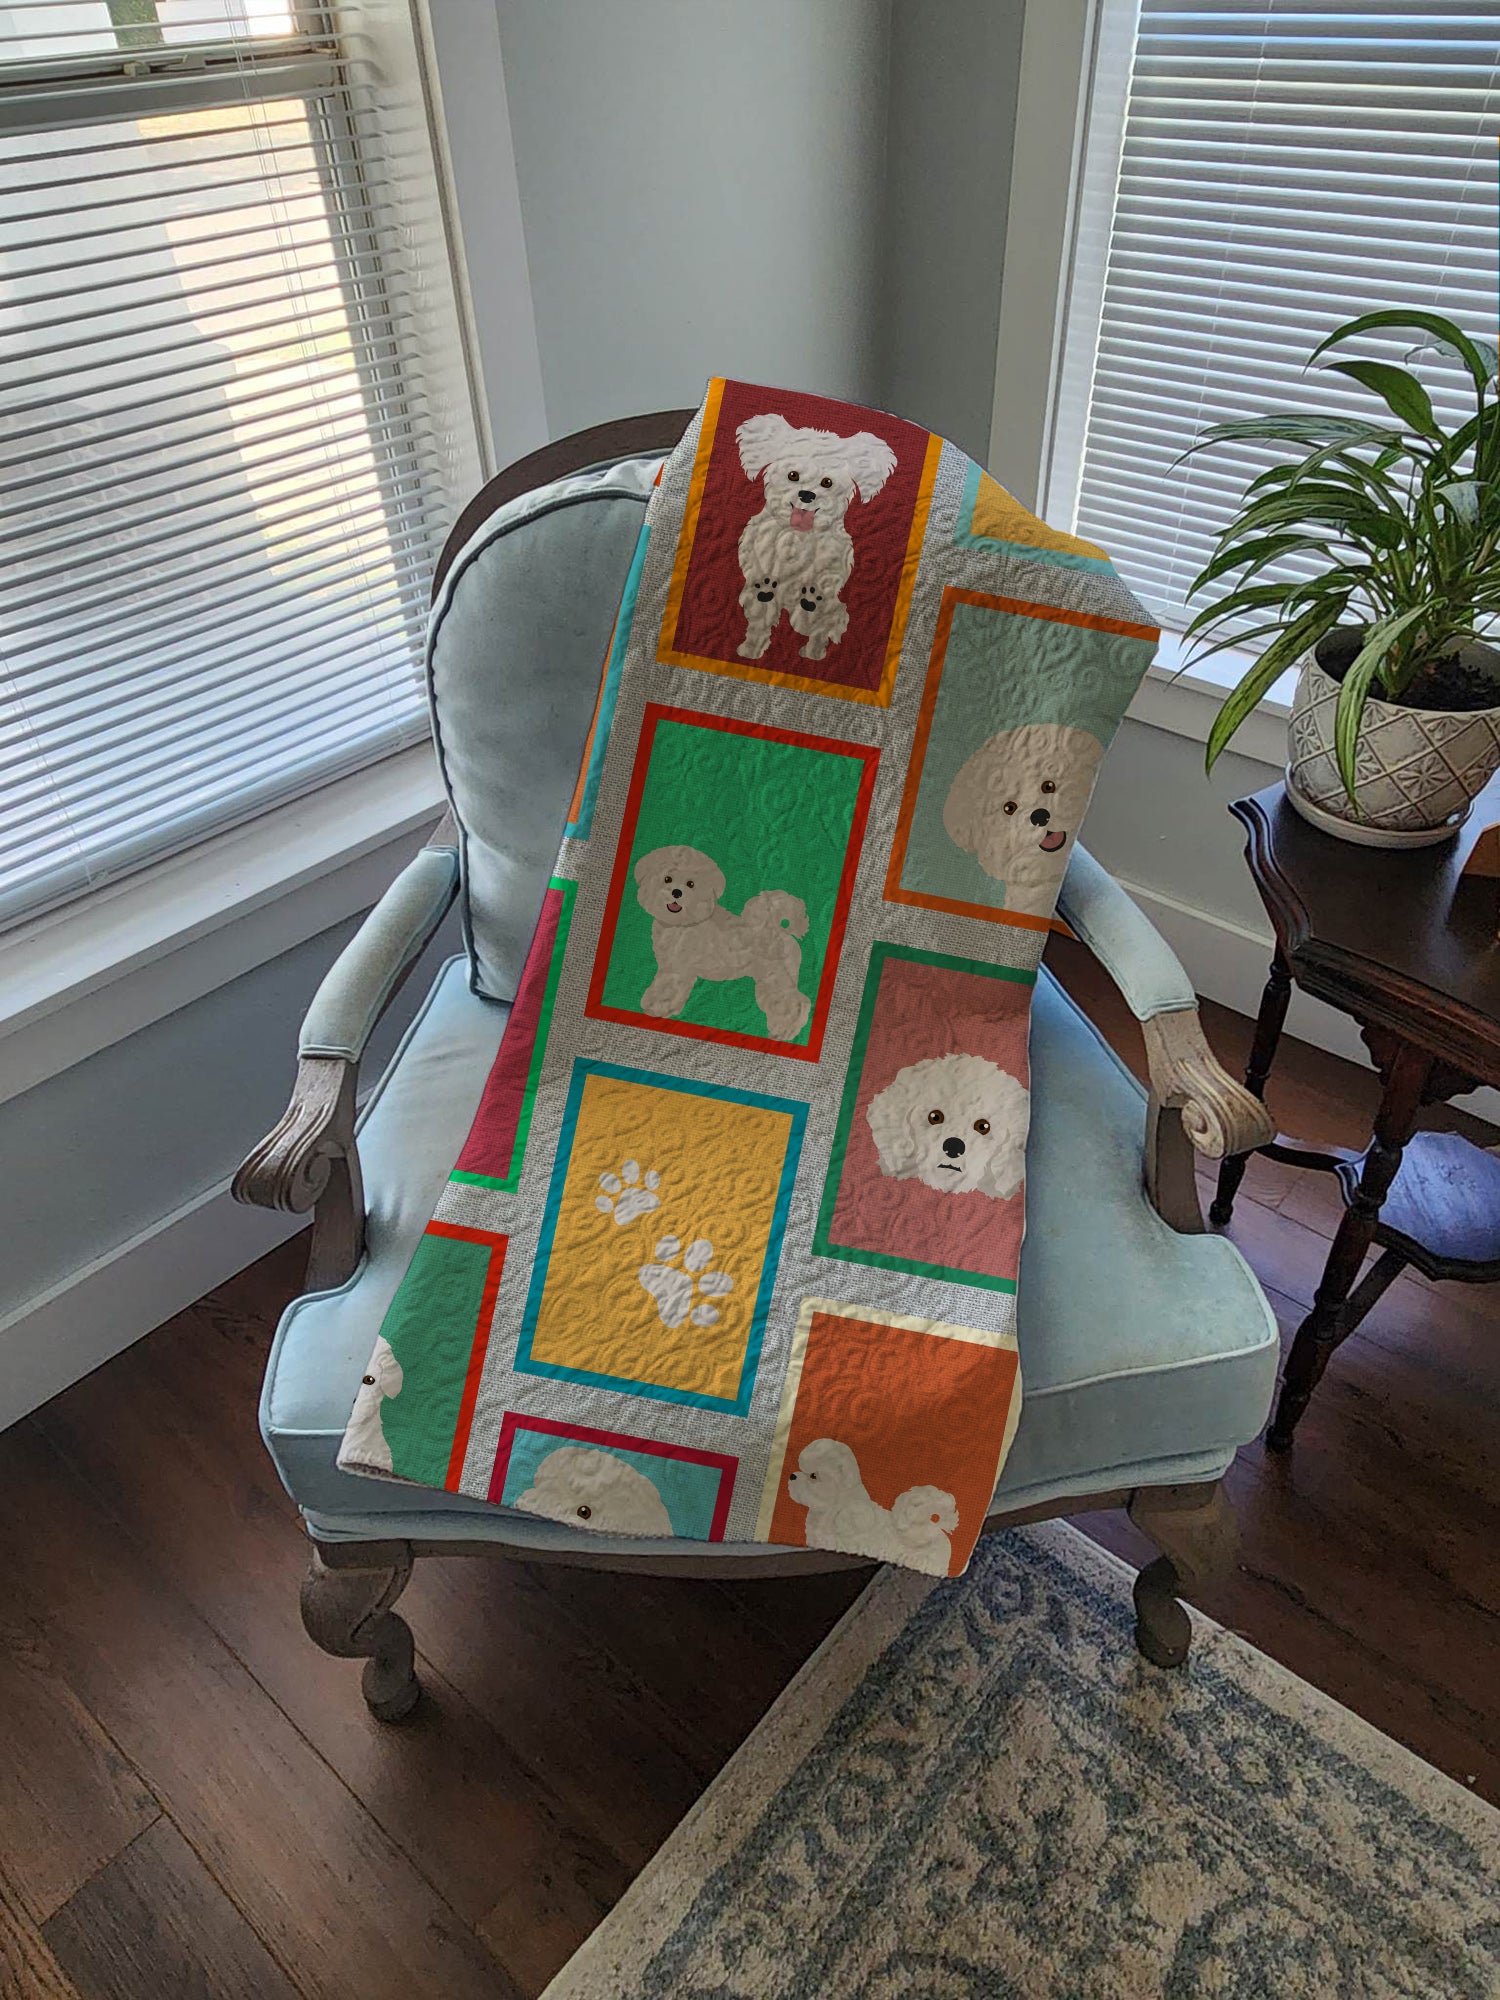 Lots of Bichon Frise Quilted Blanket 50x60 - the-store.com